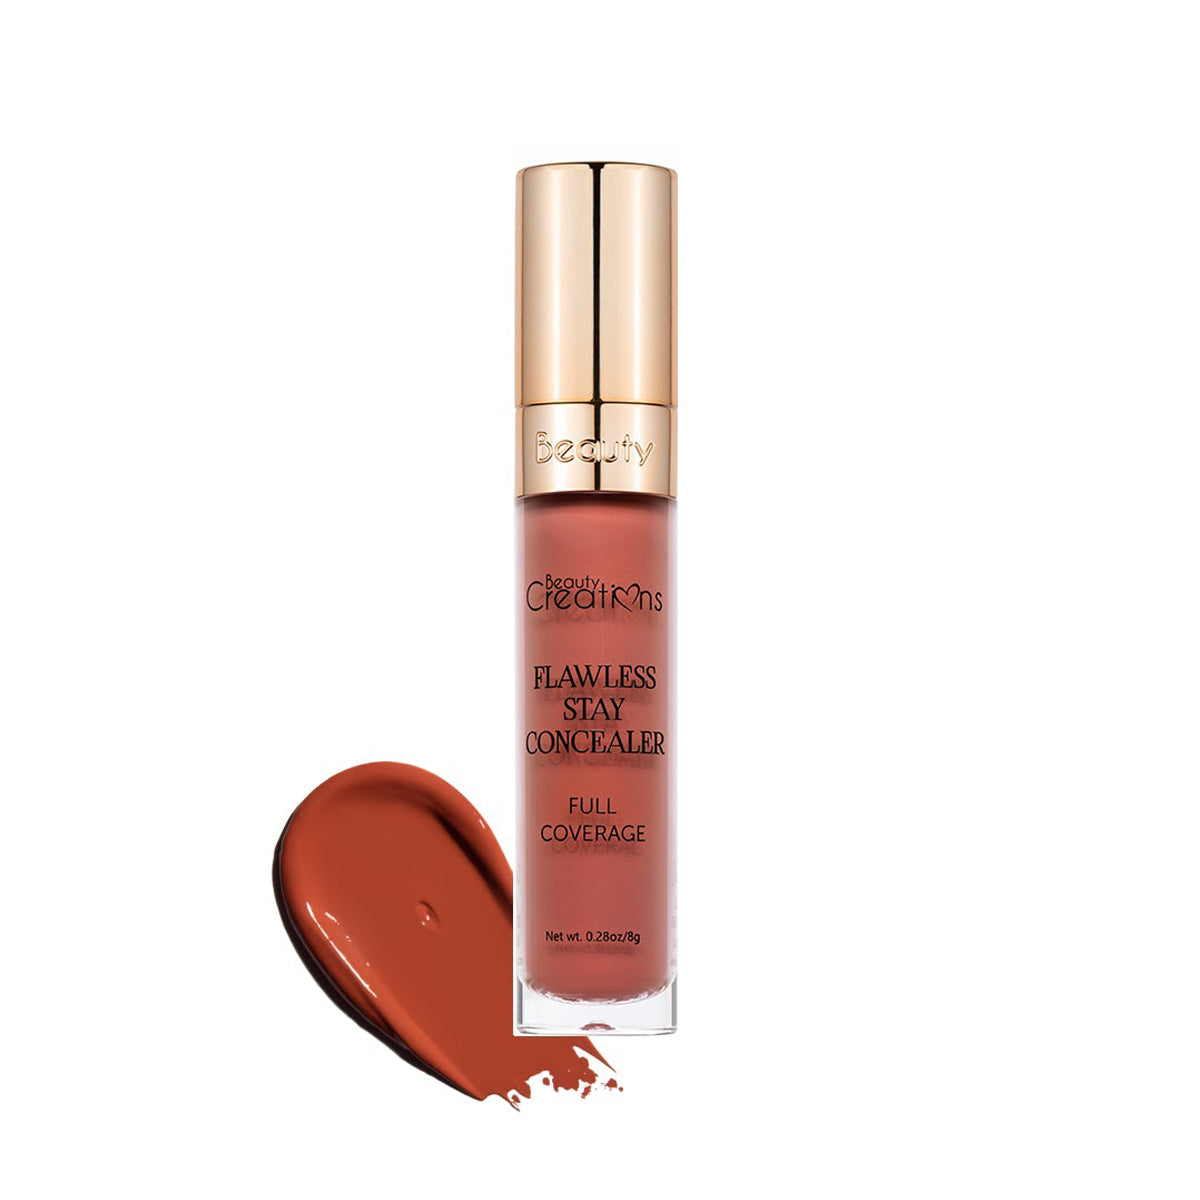 FLAWLESS STAY CONCEALER ORANGE - BEAUTY CREATIONS